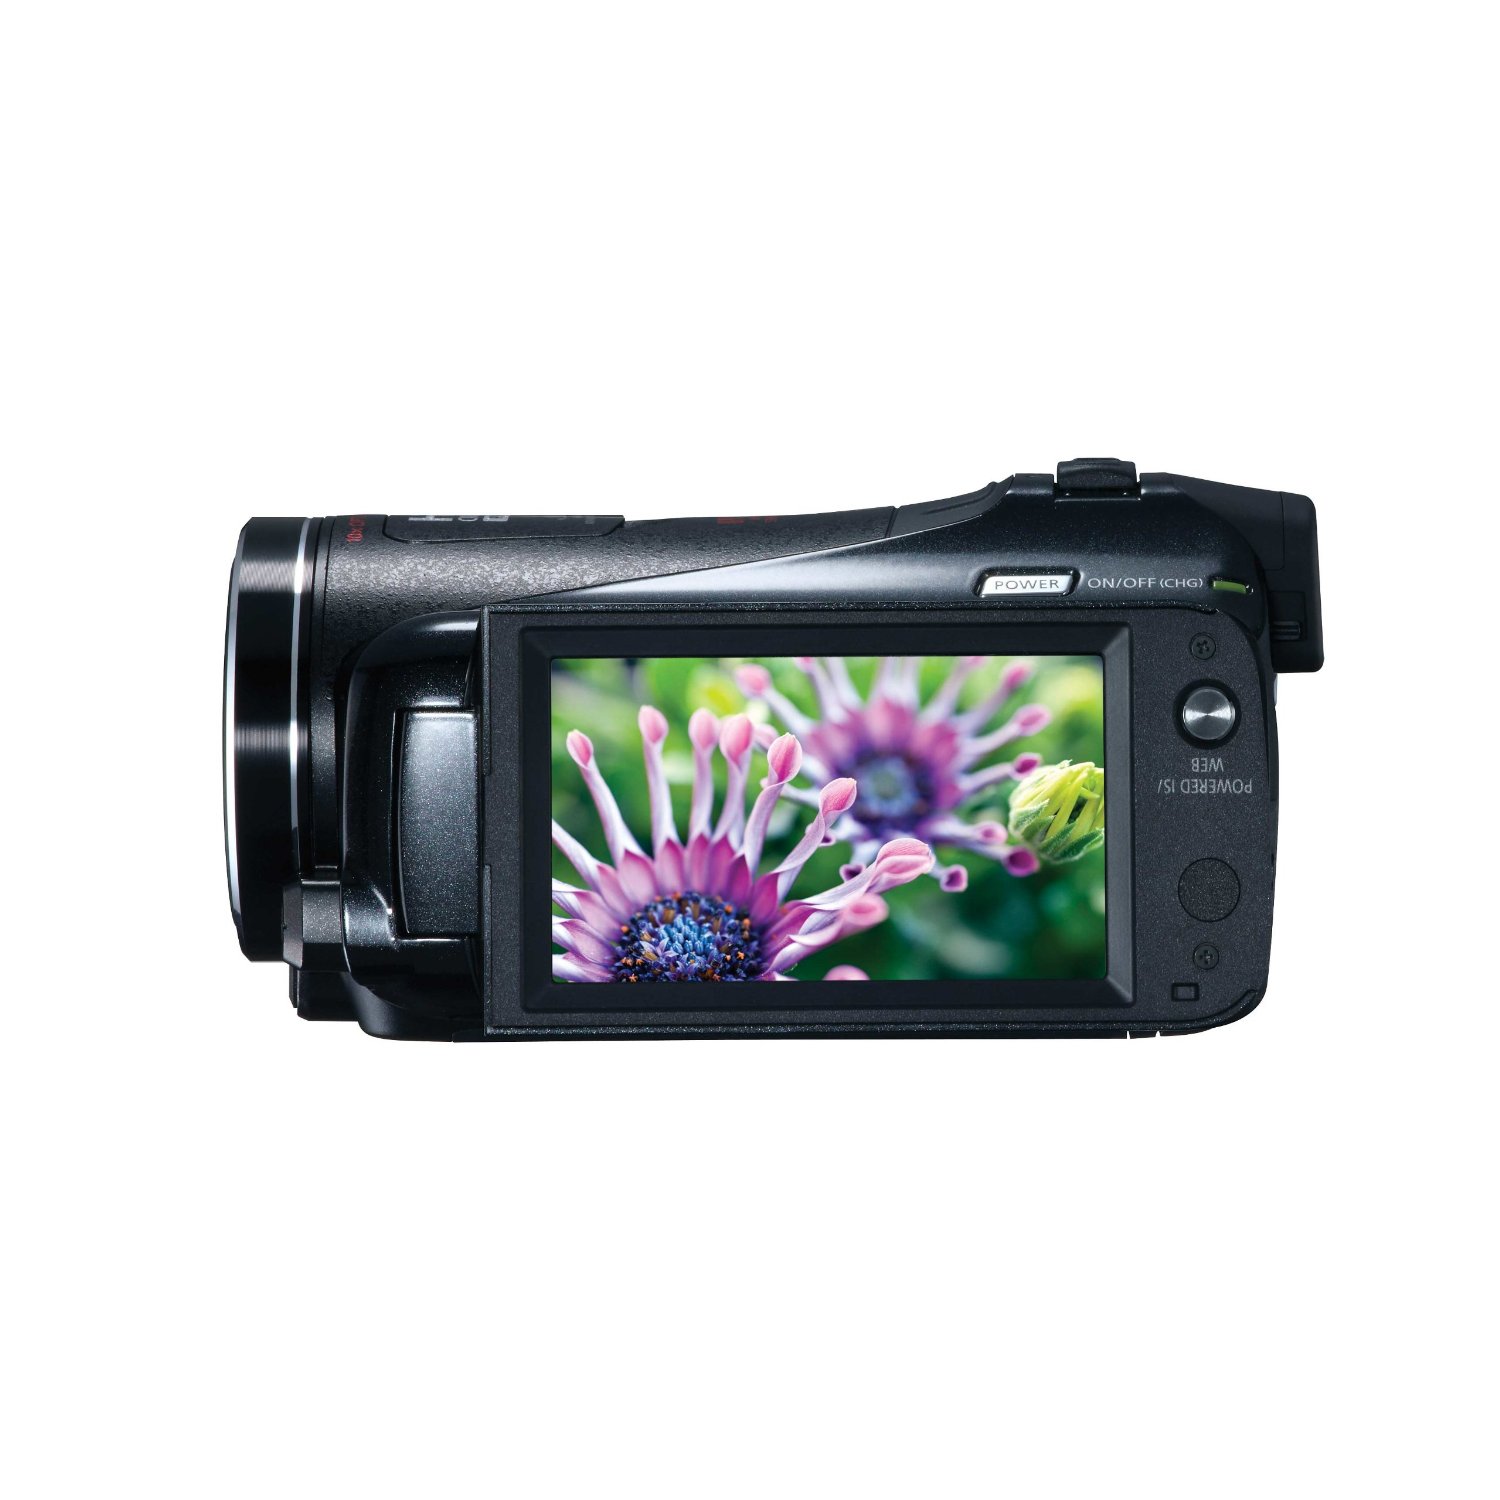 http://thetechjournal.com/wp-content/uploads/images/1112/1323670126-canon-vixia-hf-m41-full-hd-camcorder-with-hd-cmos--33.jpg